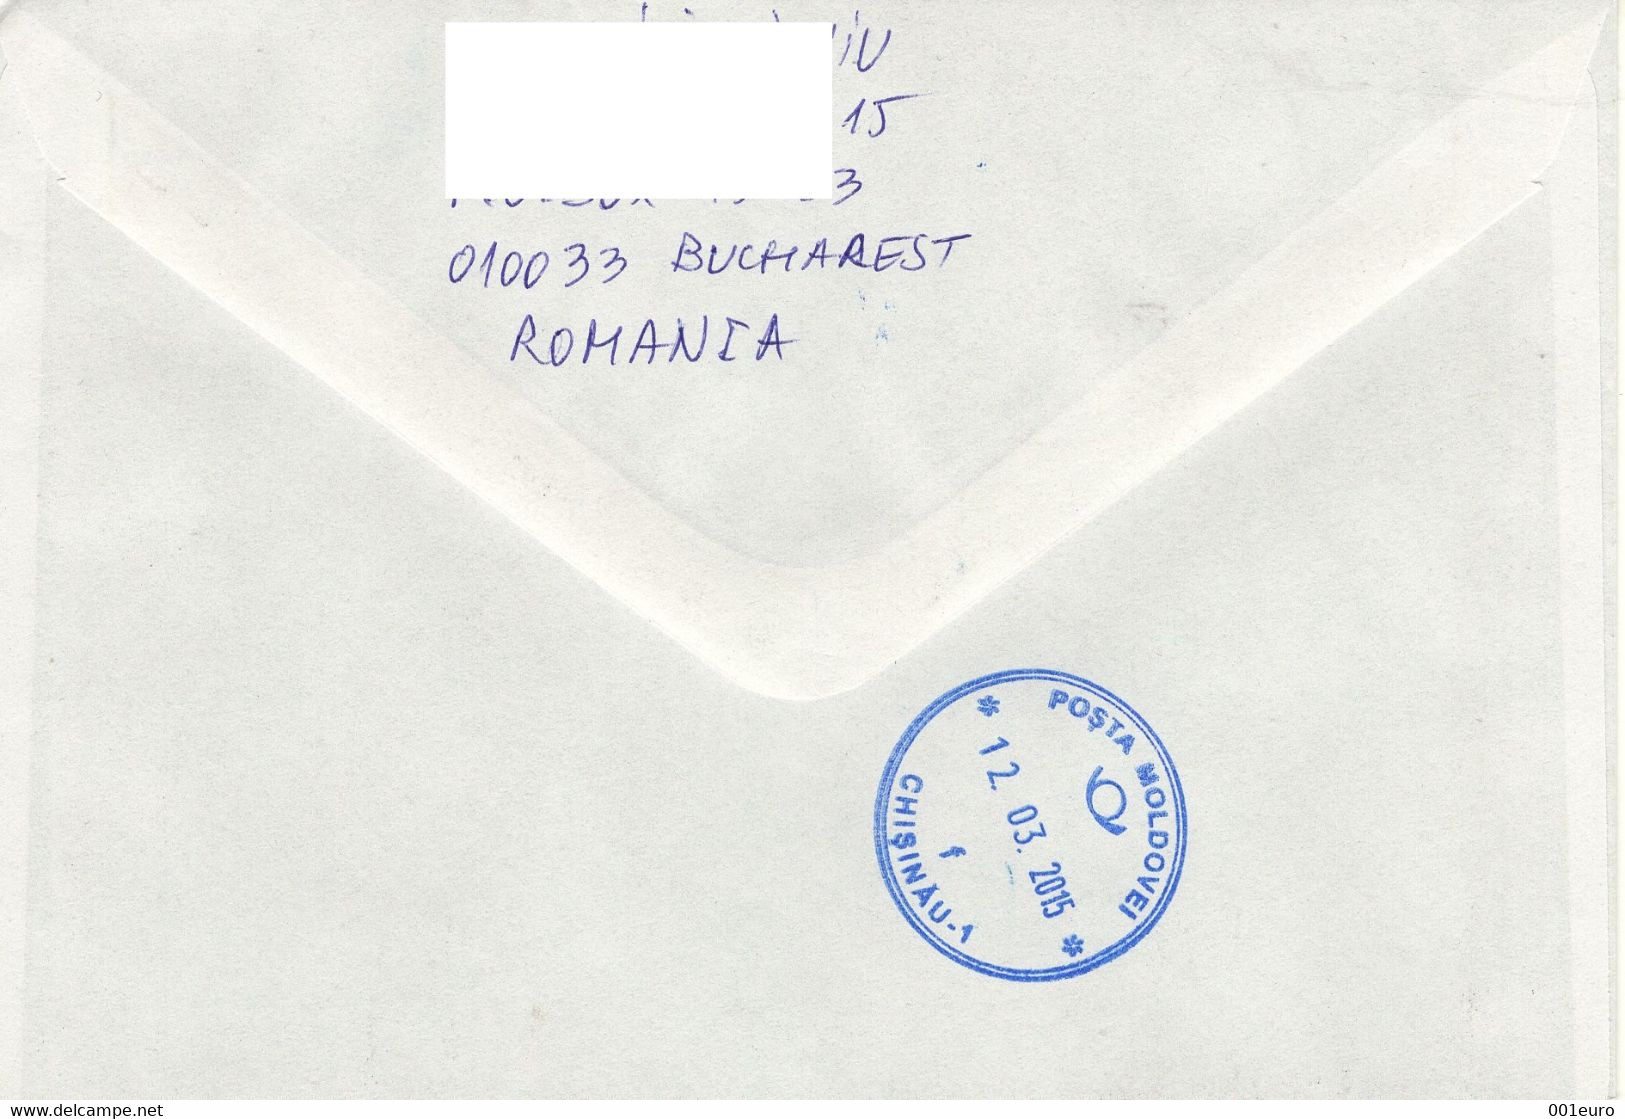 ROMANIA 2010: EUROPA - THE LETTER On REGISTERED Cover Circulated To Moldova Republic - Registered Shipping! - Briefe U. Dokumente